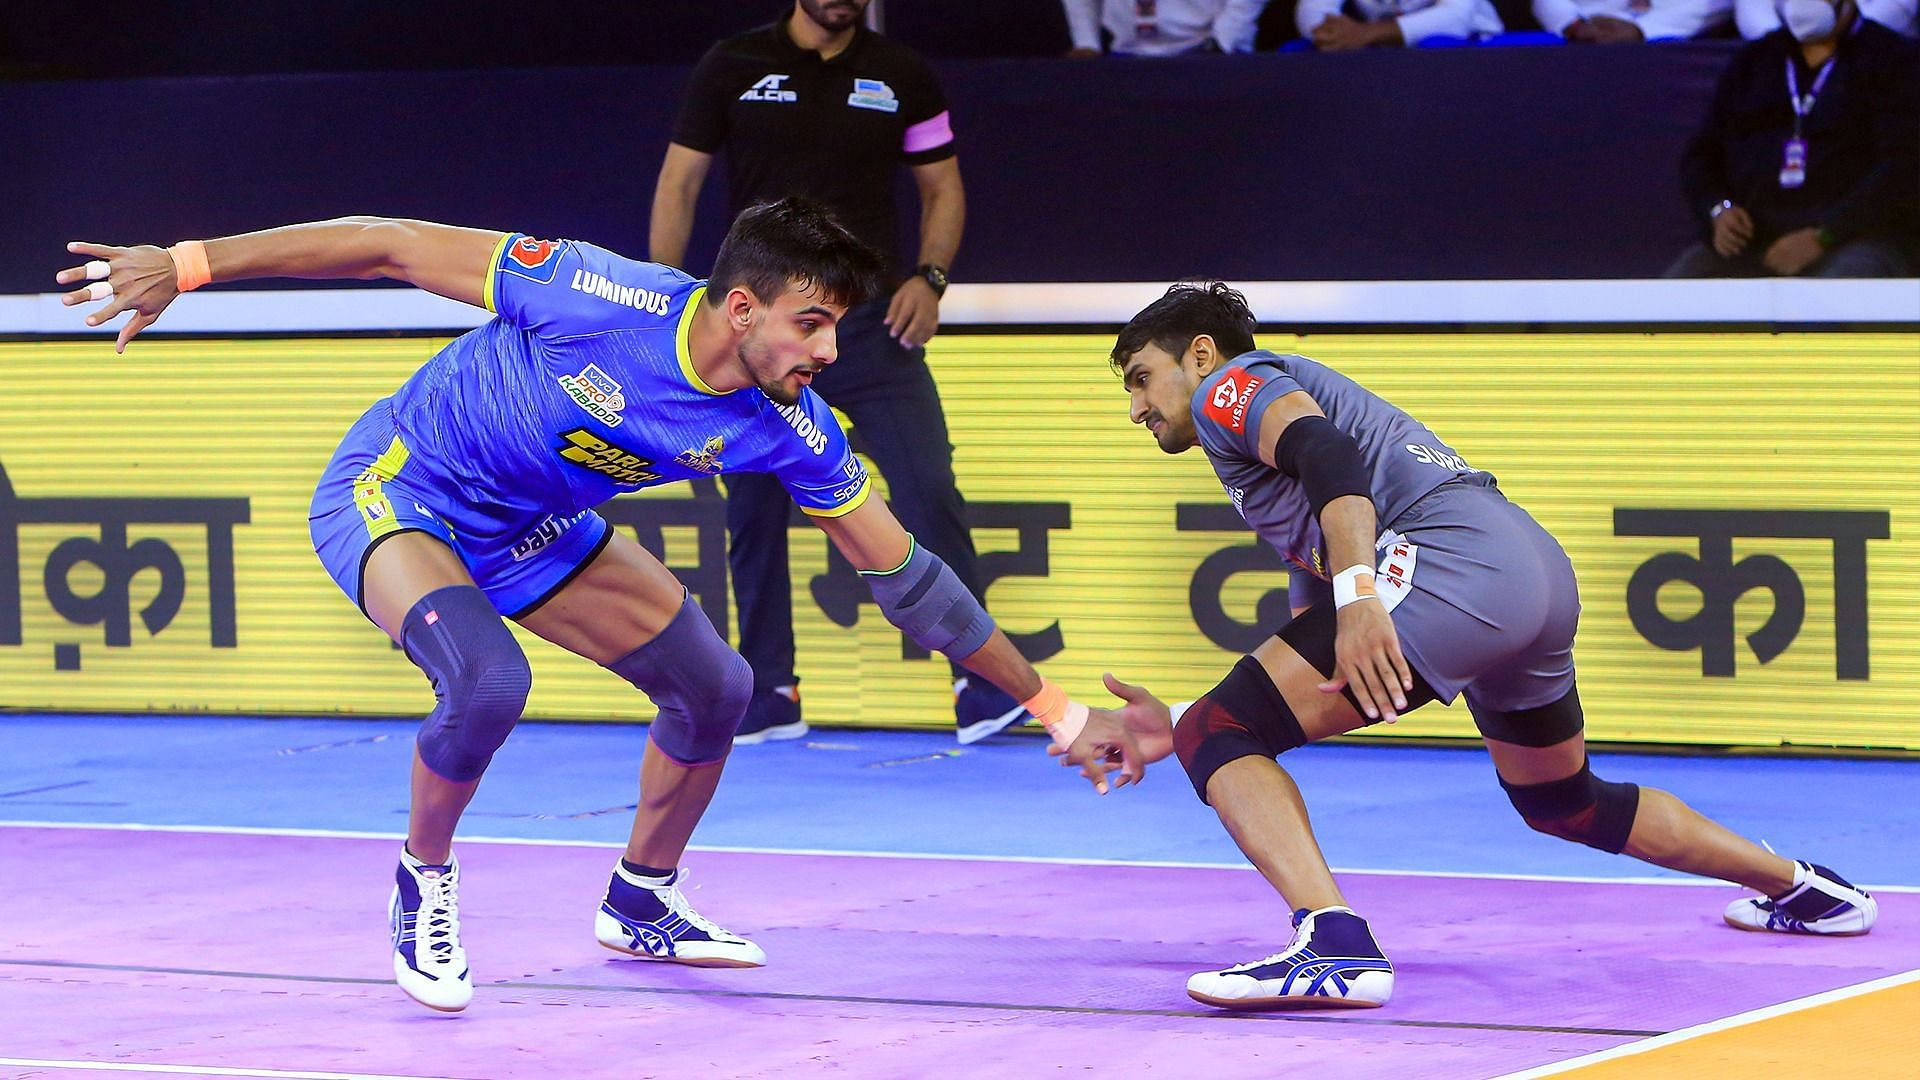 Tamil Thalaivas have entered the top 4 of the points table with a victory over the Haryana Steelers (Image: Pro Kabaddi/Facebook)